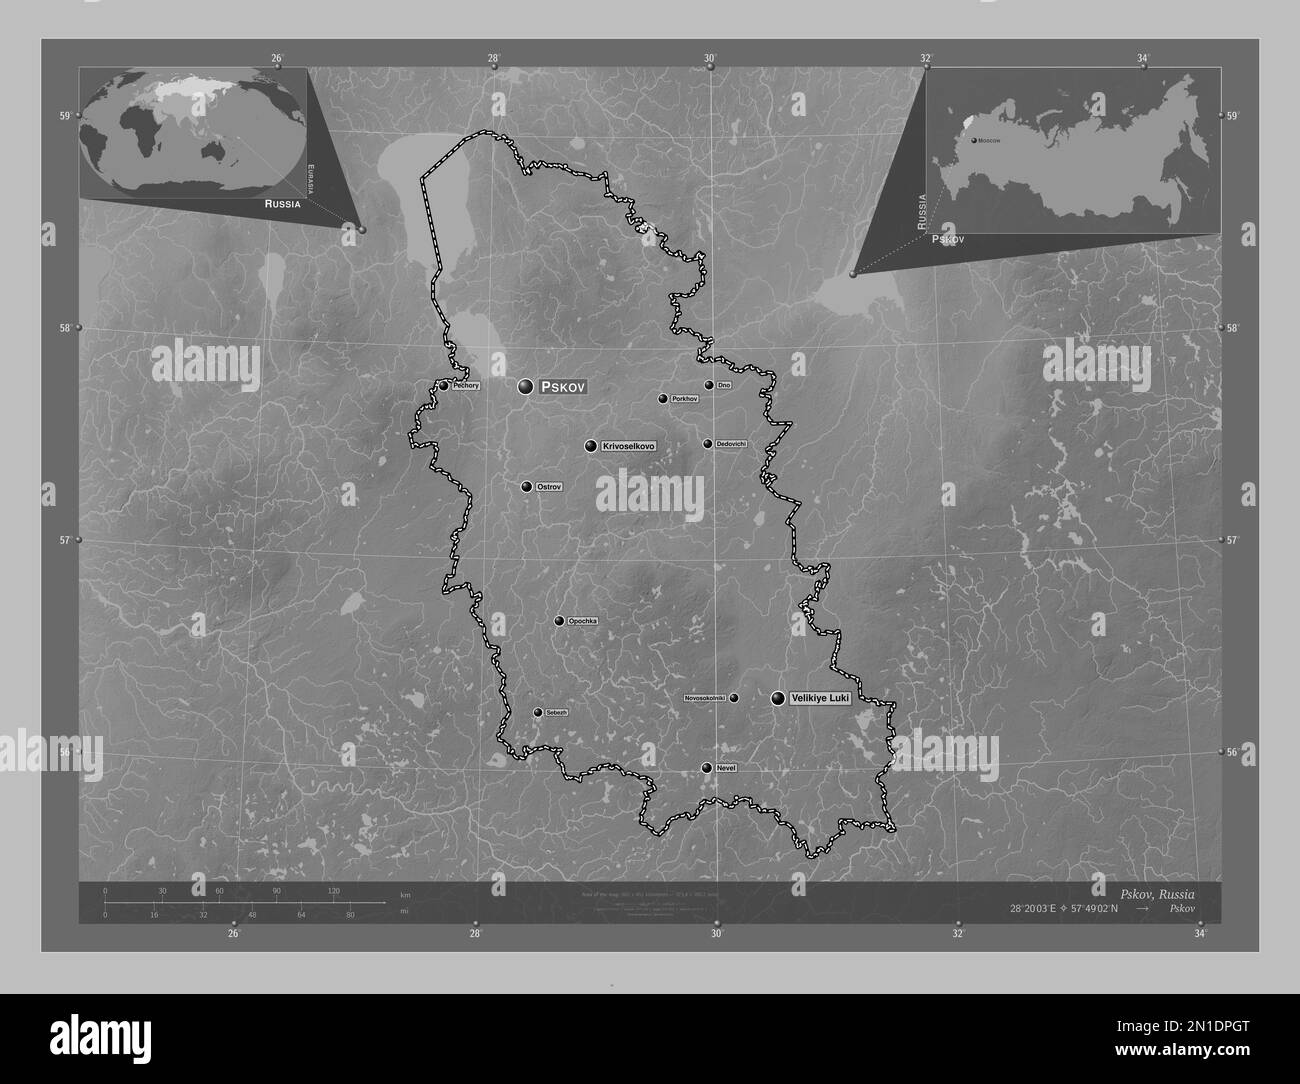 Pskov, region of Russia. Grayscale elevation map with lakes and rivers. Locations and names of major cities of the region. Corner auxiliary location m Stock Photo